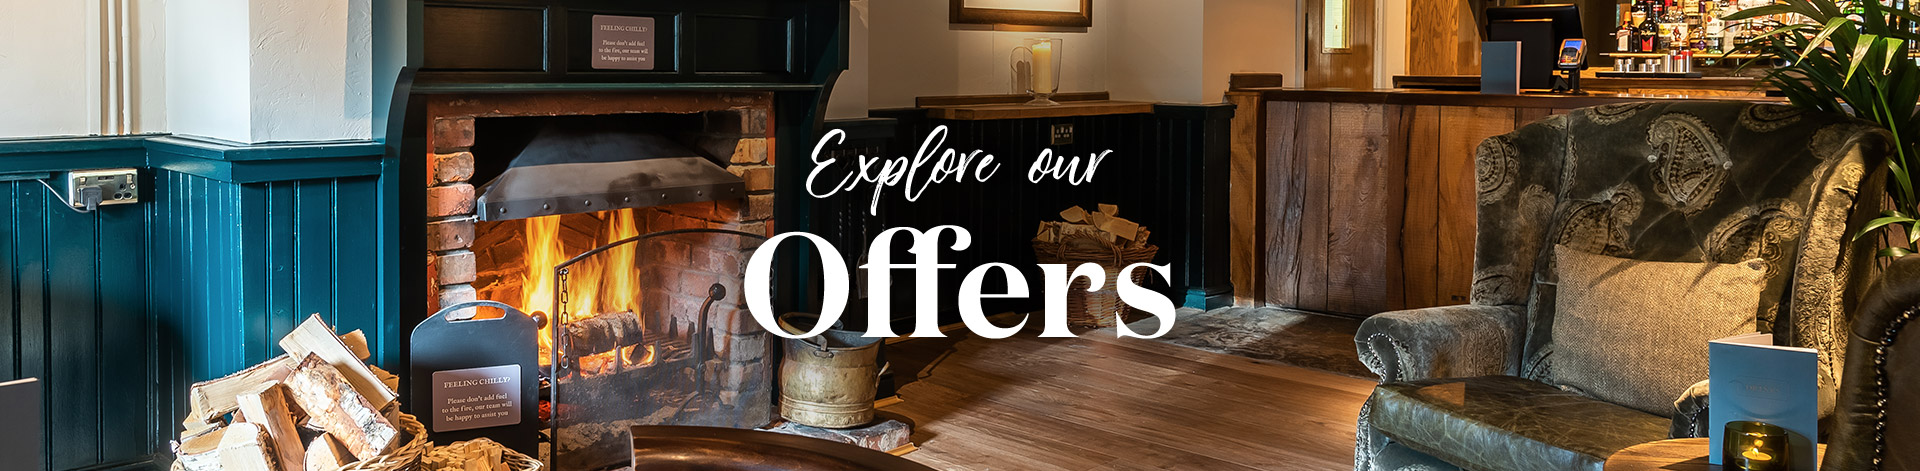 Our latest offers at The Hawes Inn